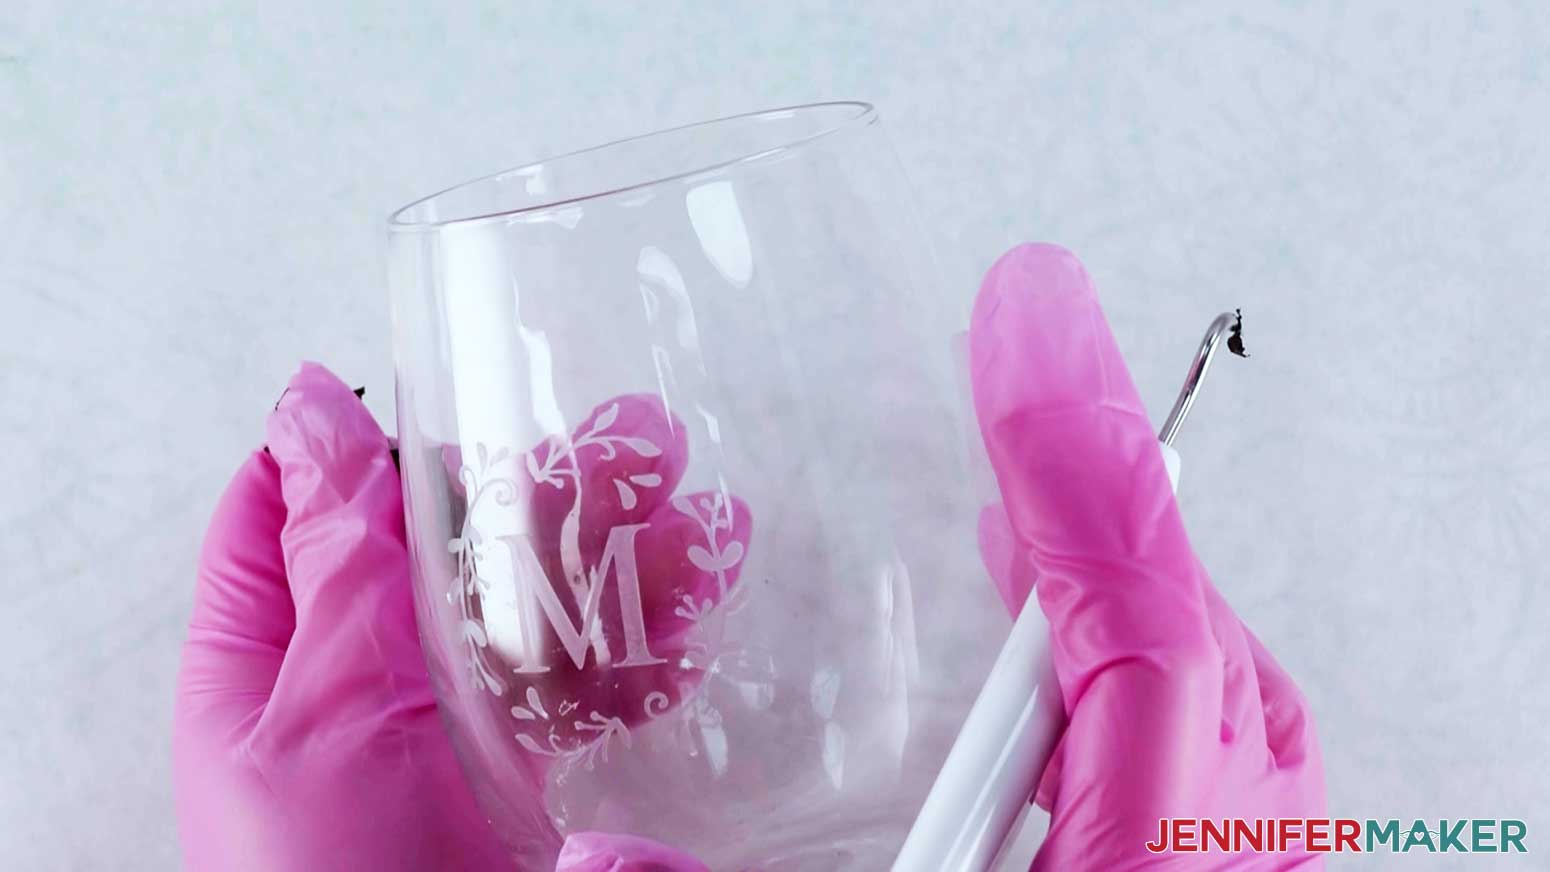 A photo showing two hands with gloves on holding a wine glass with the color glass etching design etched in the center, the letter M clearly visible